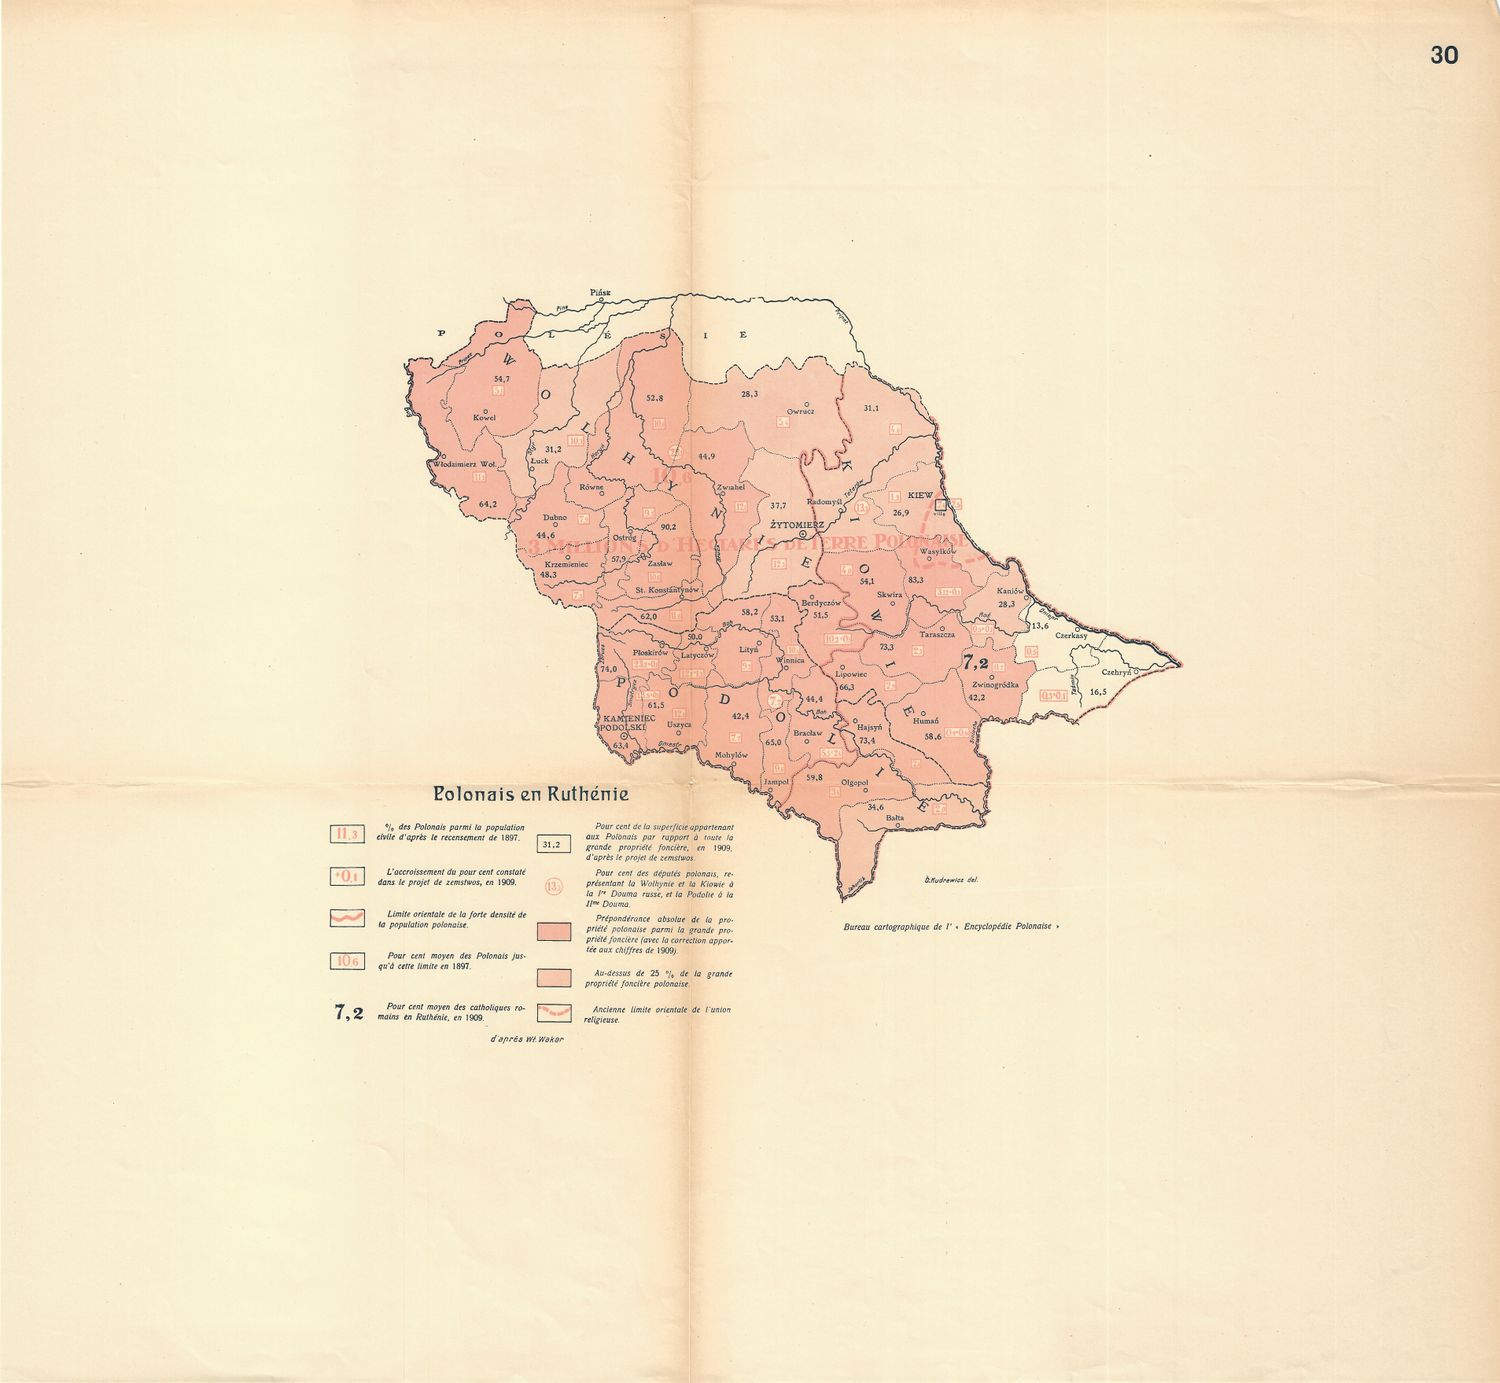 1920 Population Map of Poland and Ruthenia in French 